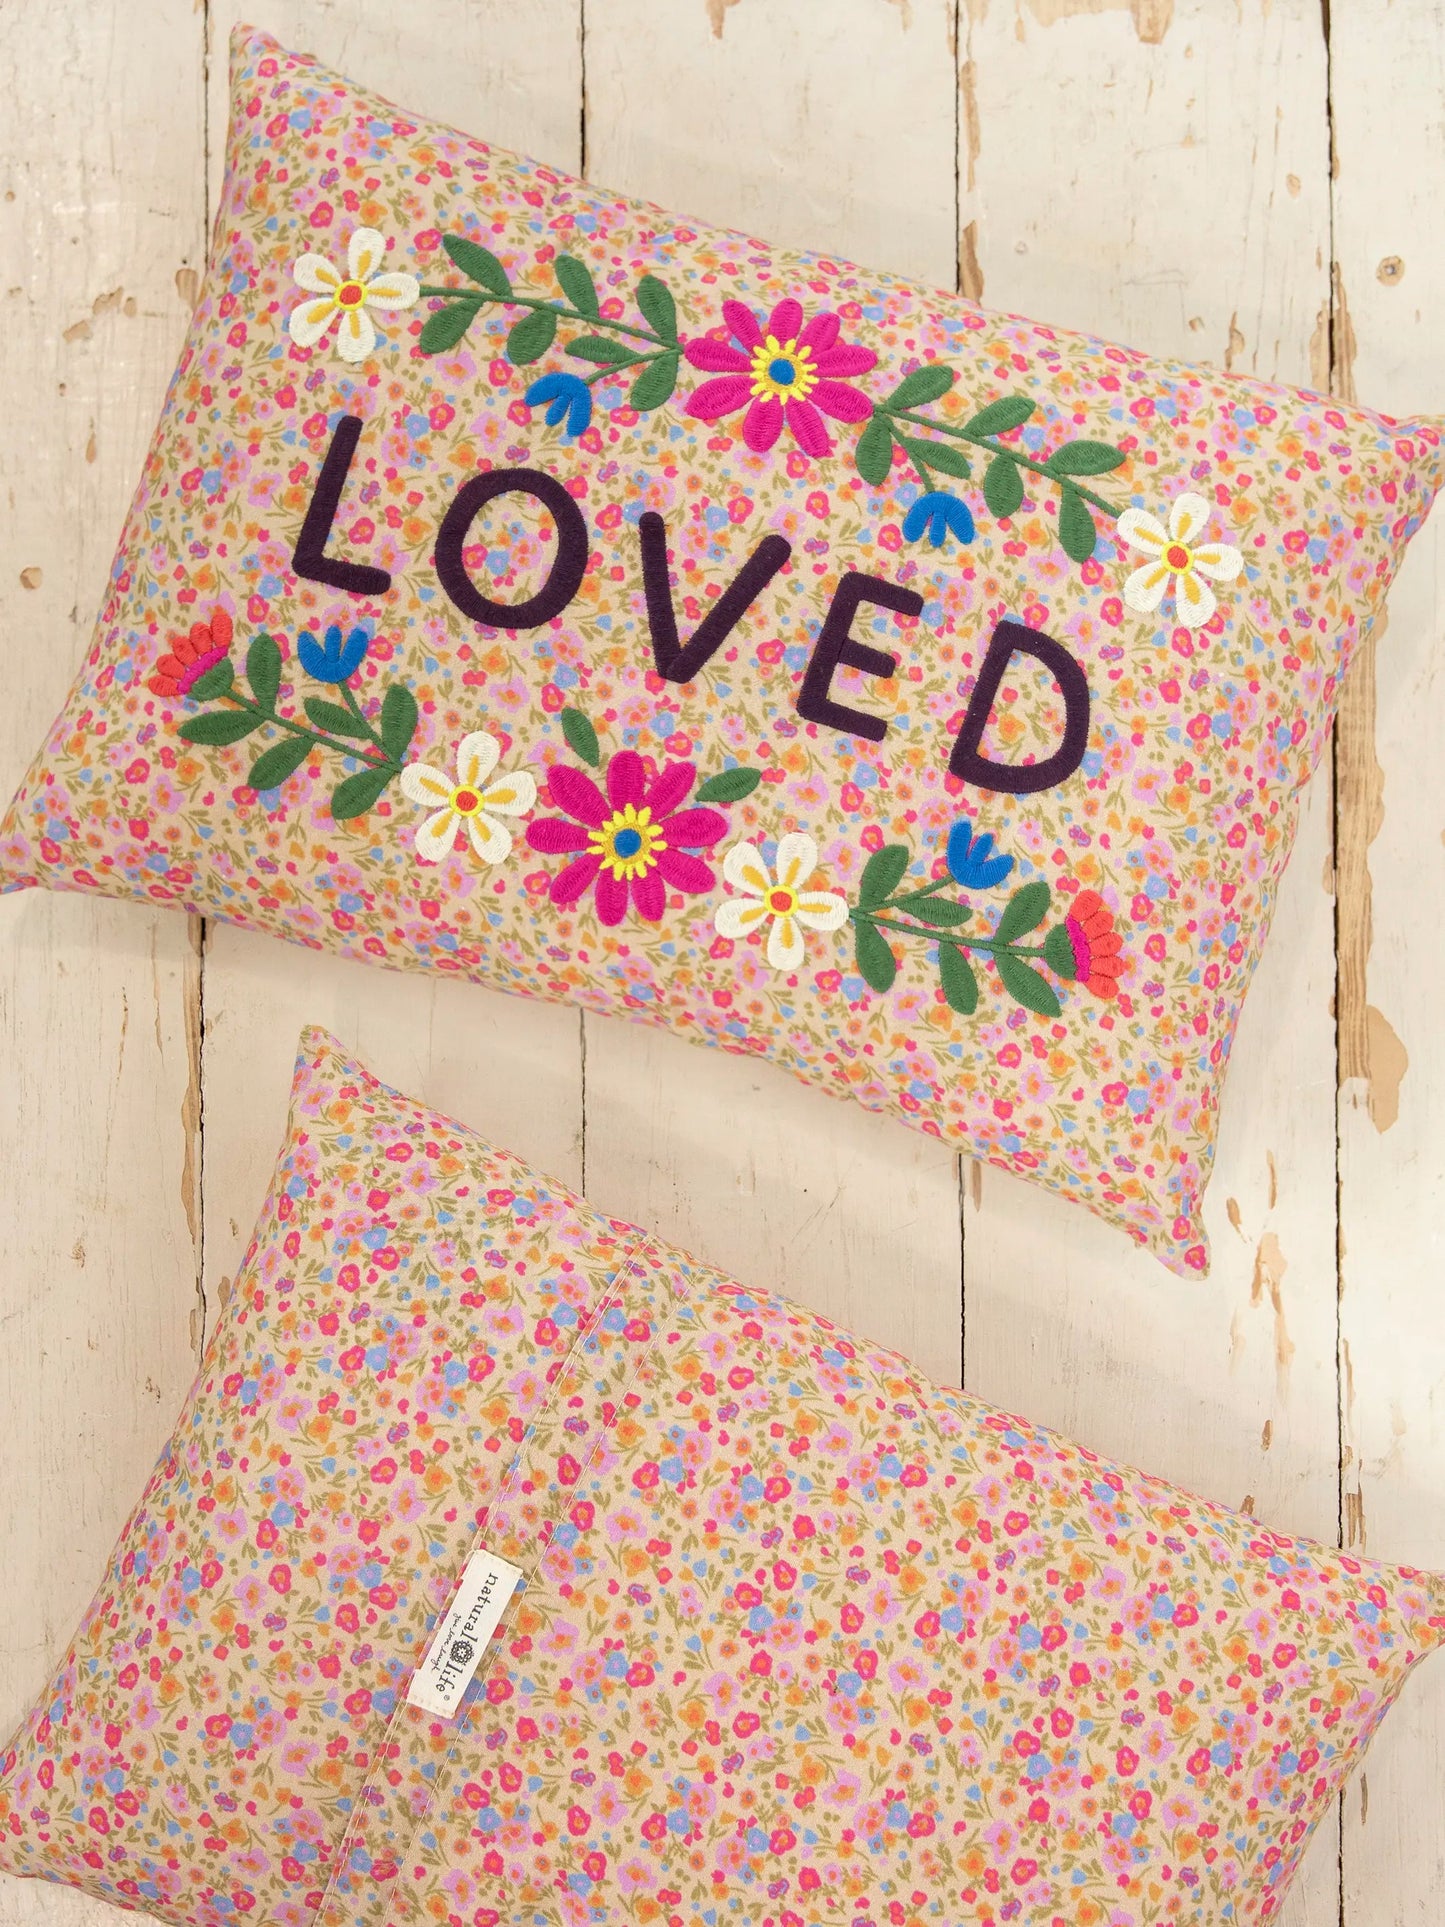 Embroidered Giving Pillow - Loved